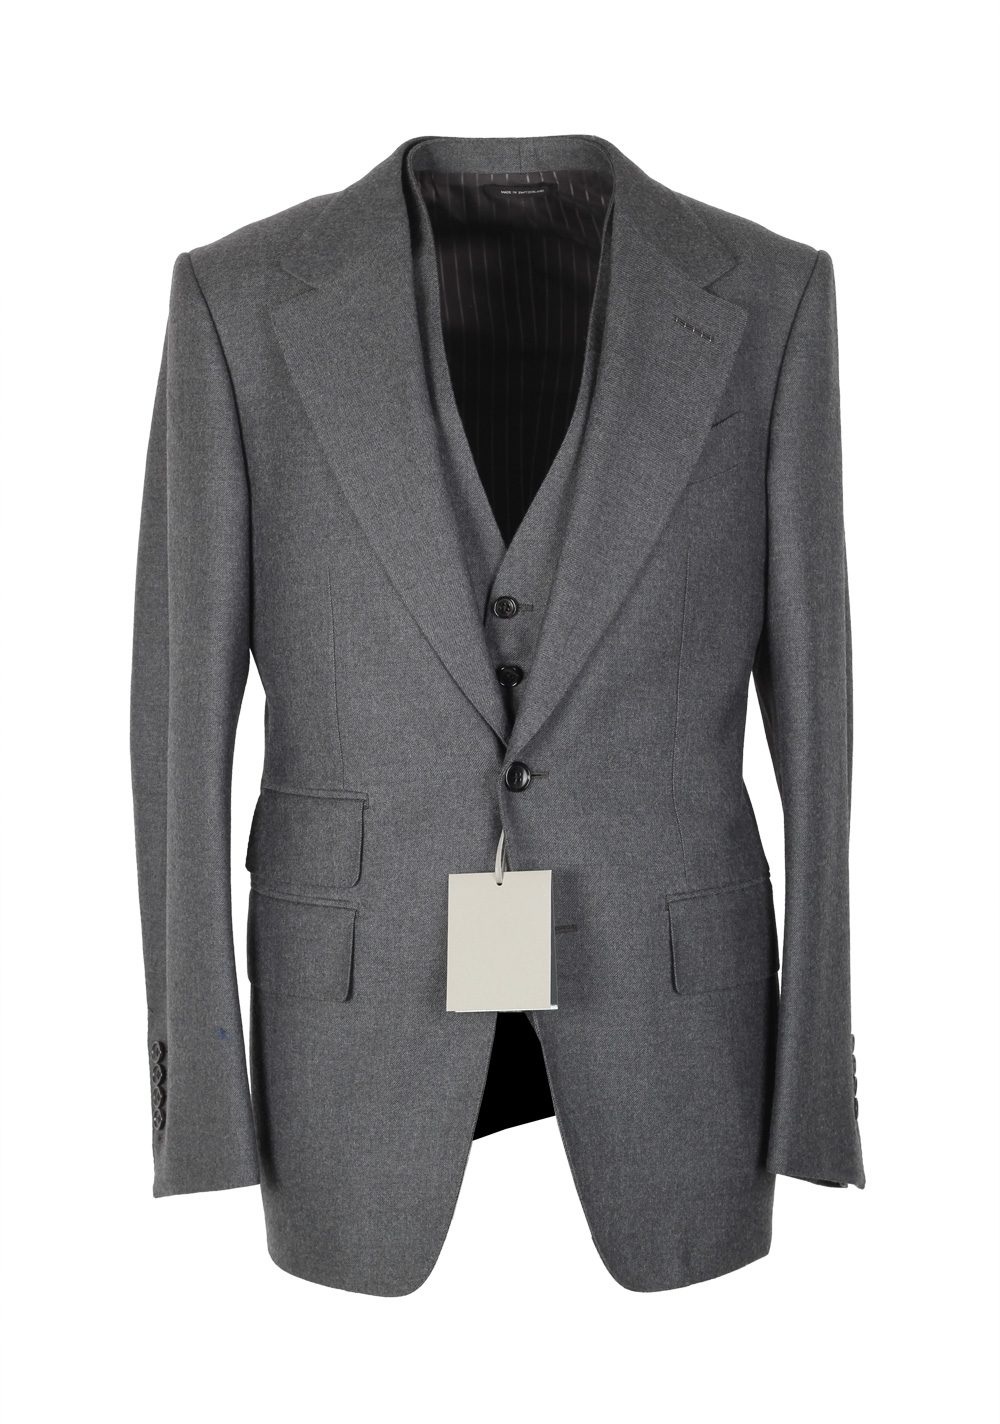 TOM FORD Shelton Solid Gray 3 Piece Suit Size 46 / 36R U.S. Wool ...